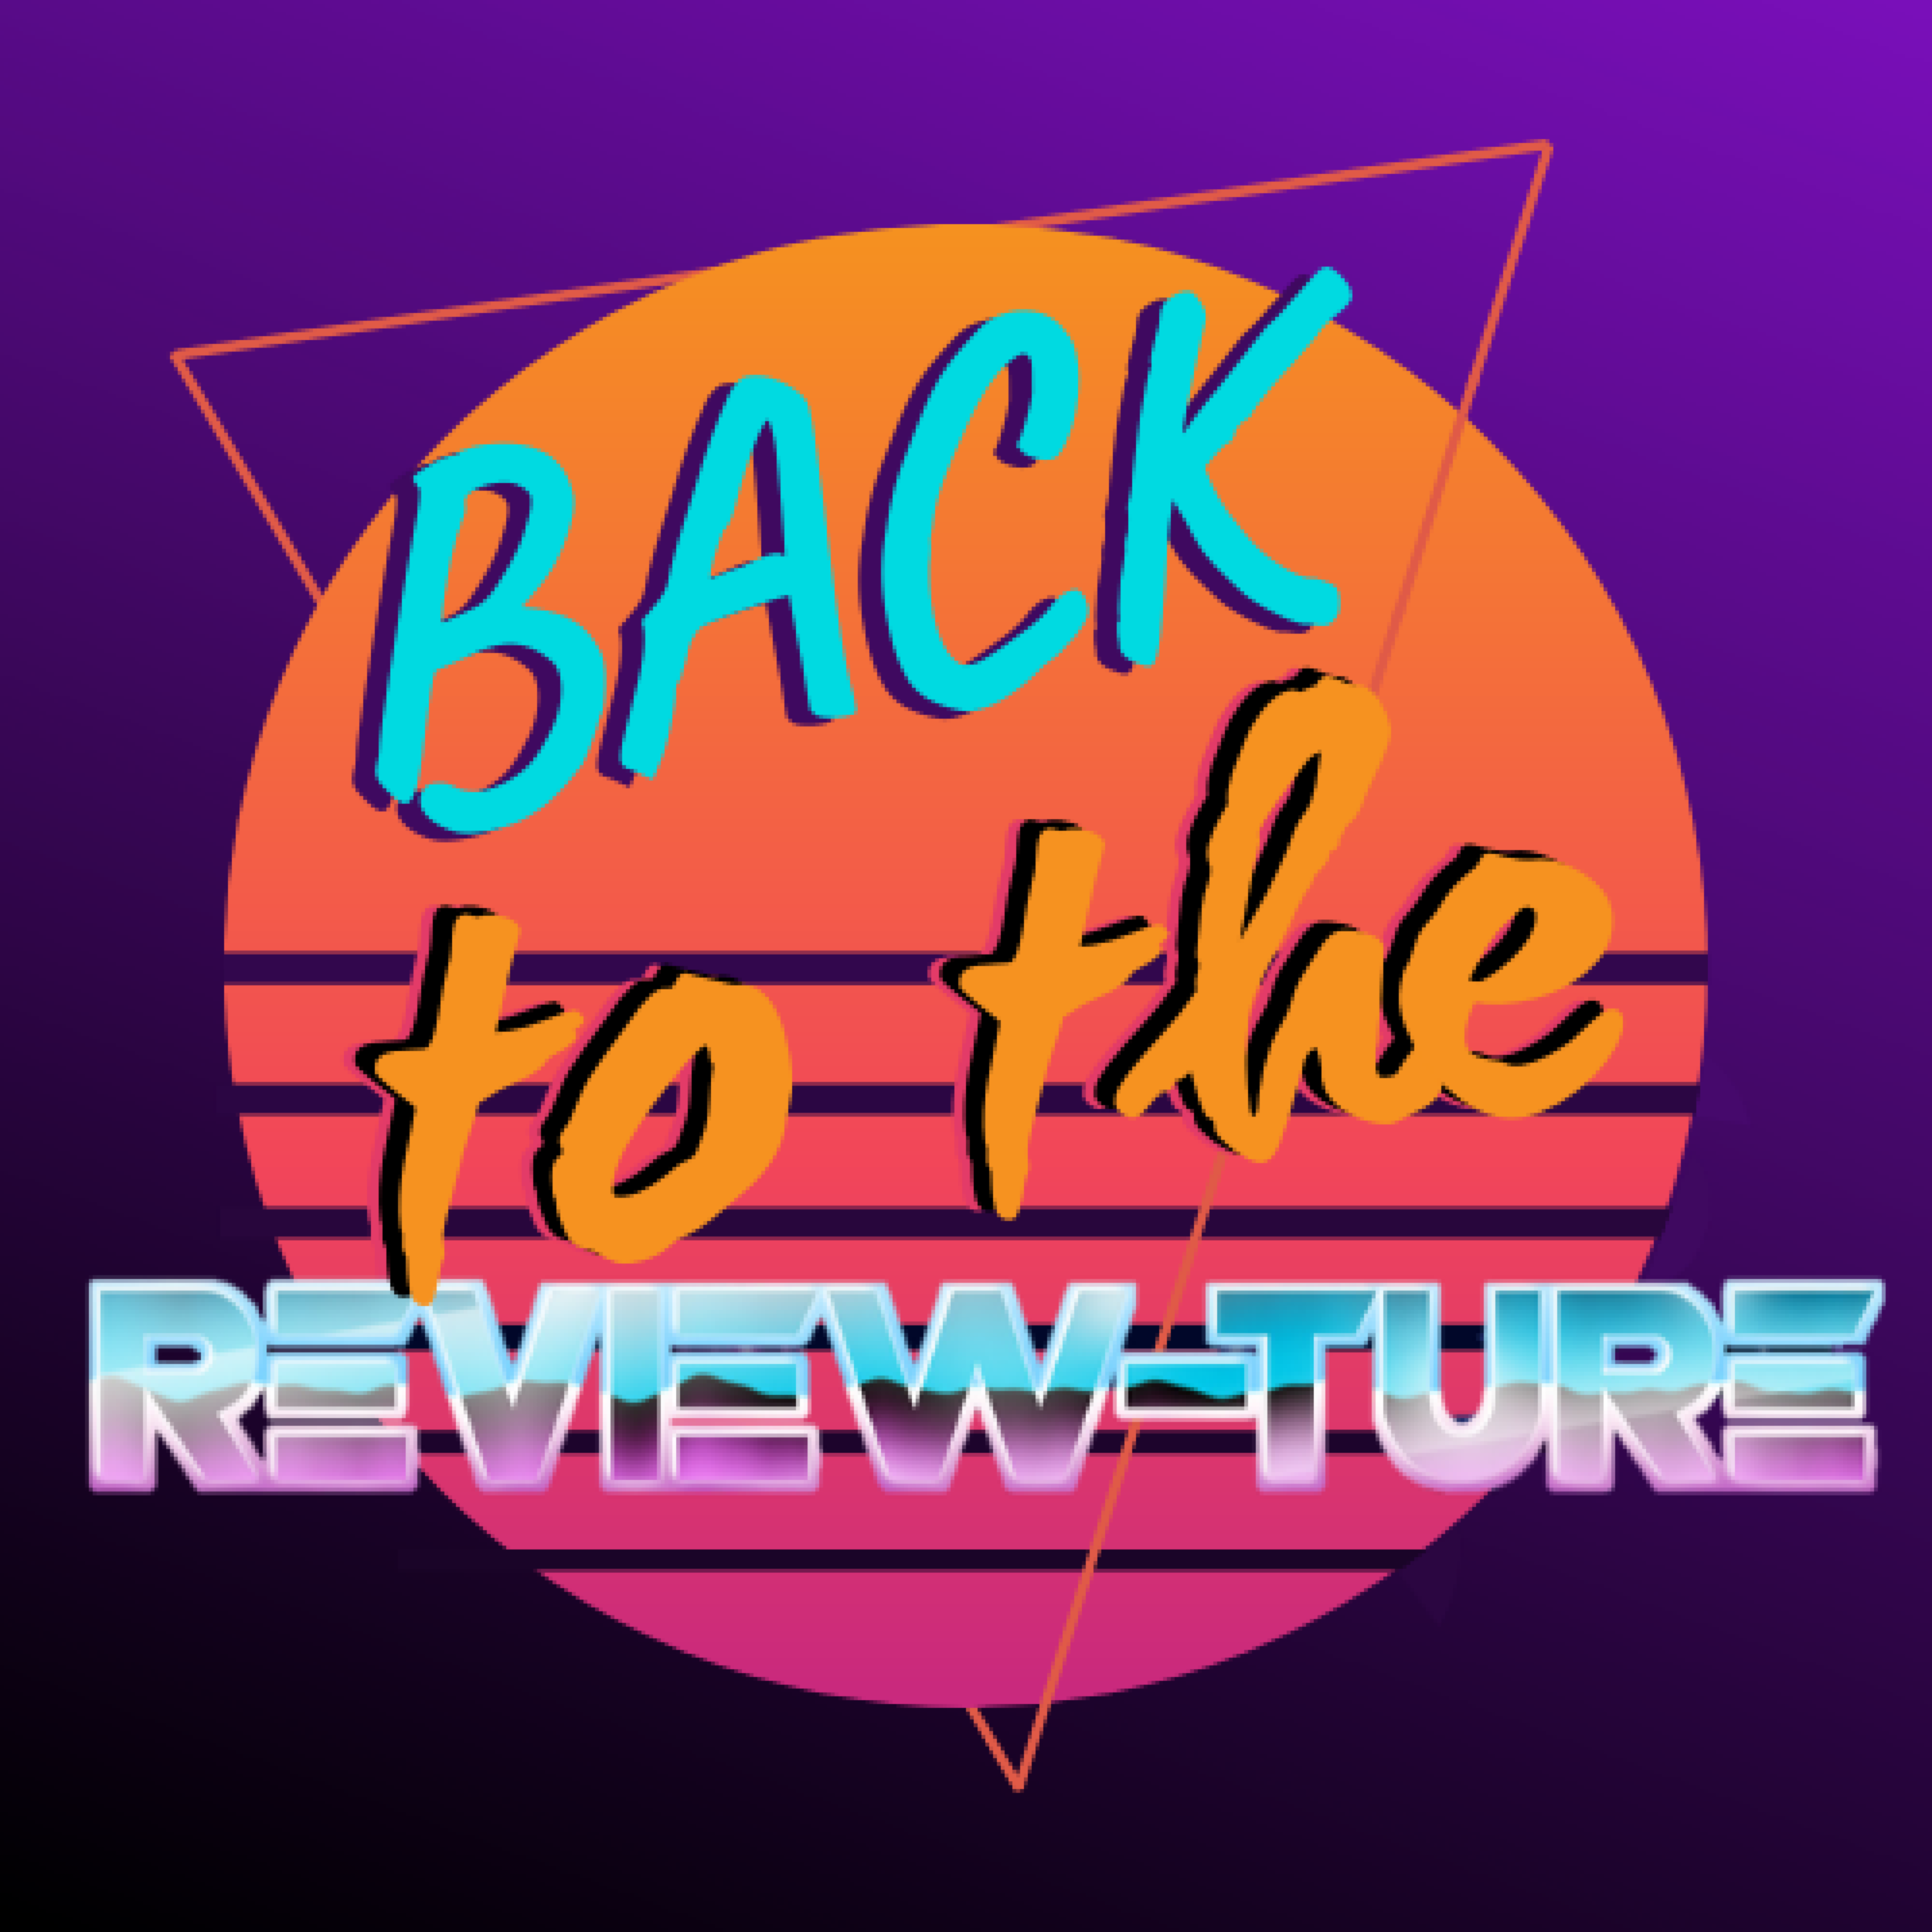 Back To The Review-ture